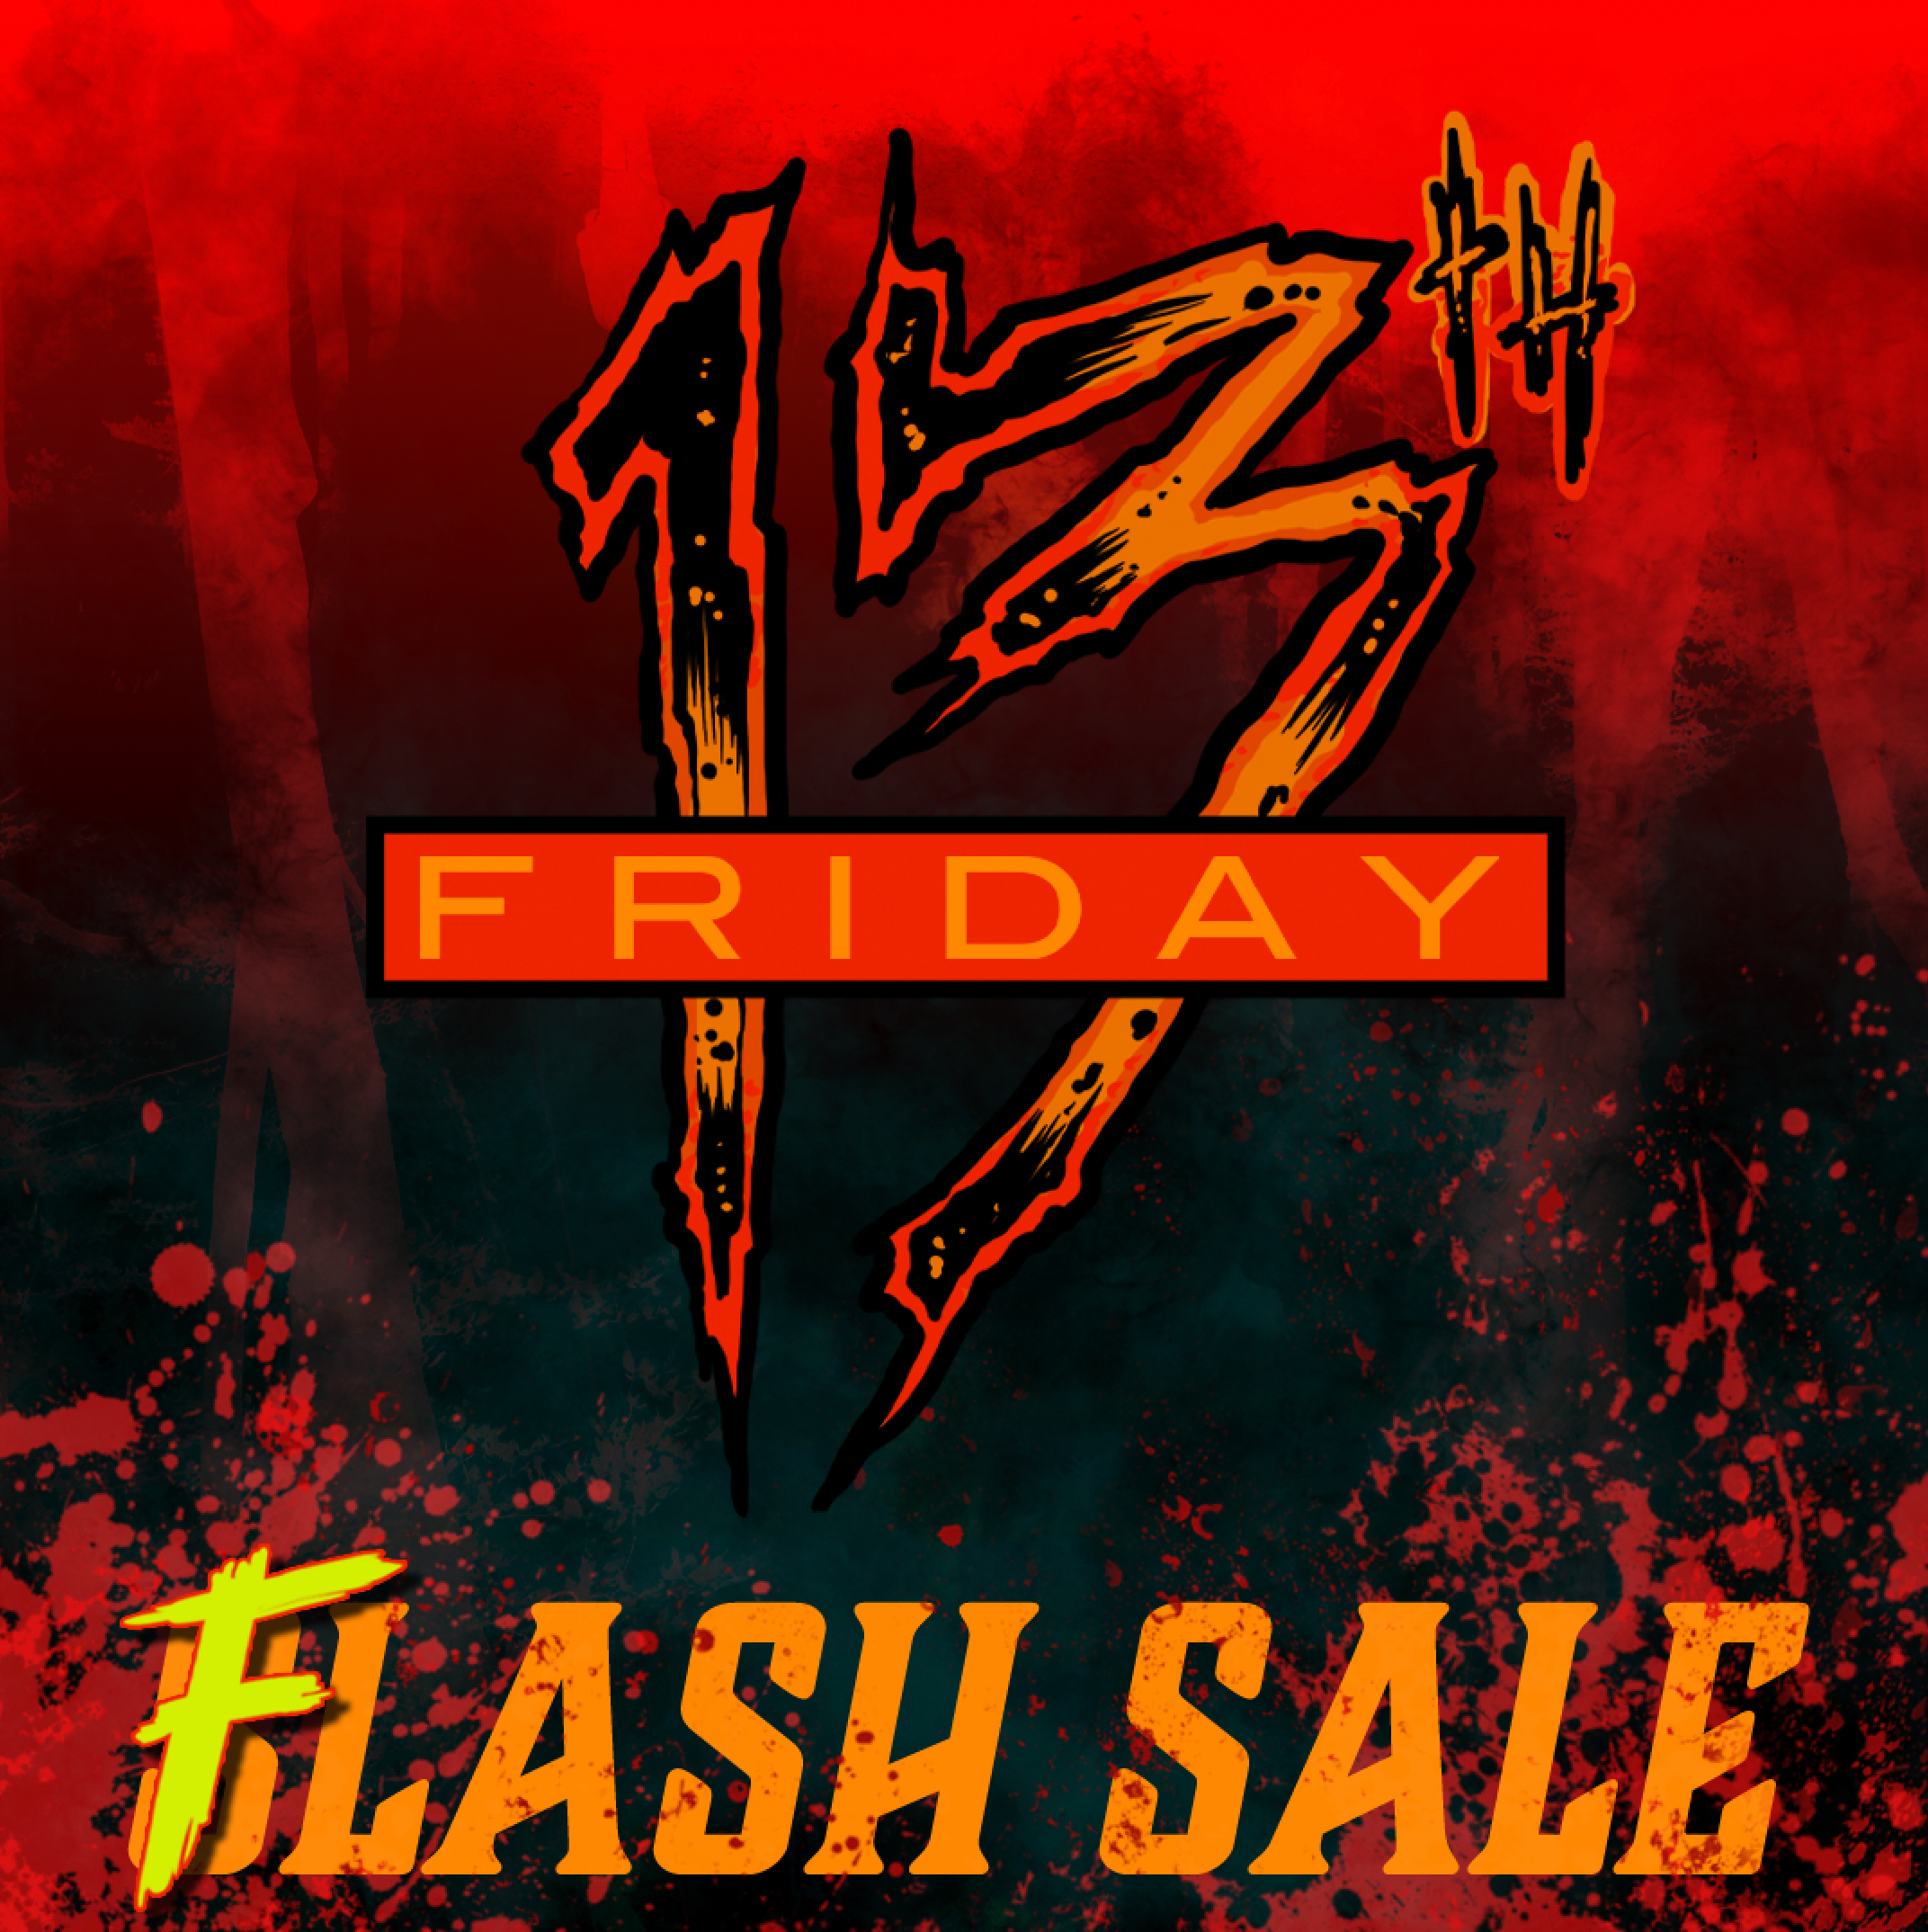 Friday the 13th Flash Sale!